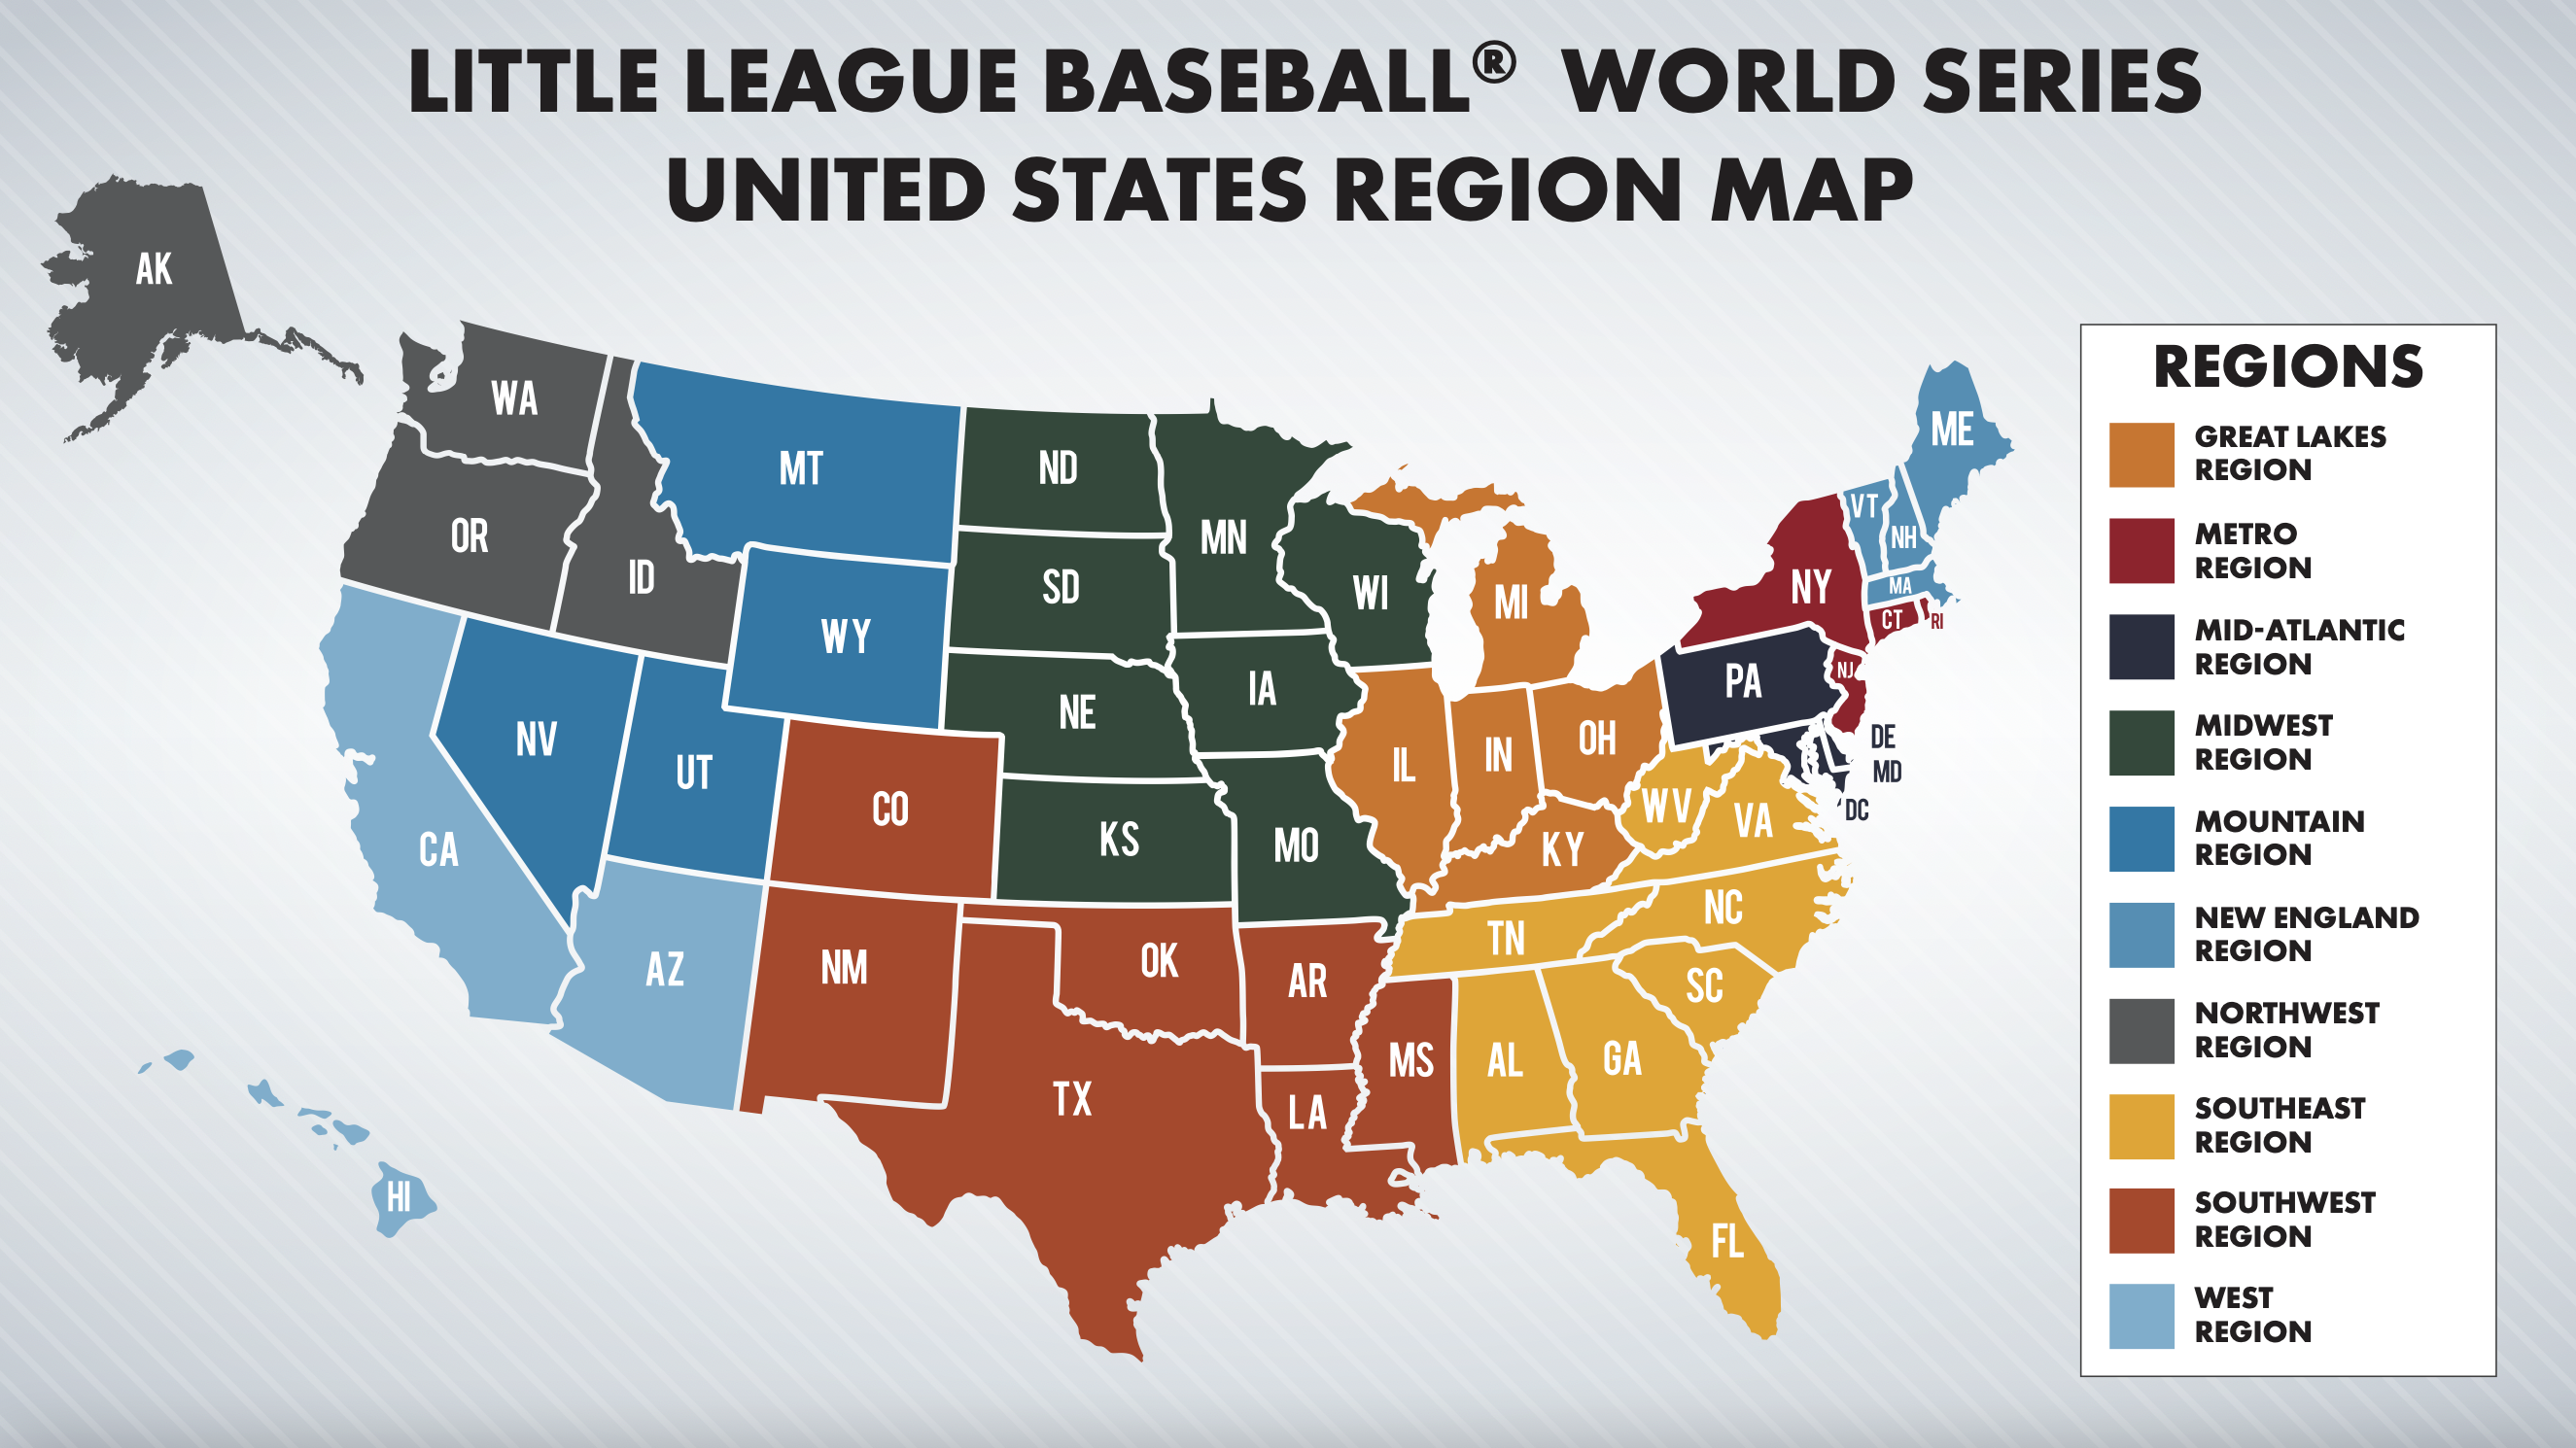 Llws 2022 Schedule Little League Realigns Us Regions In Preparation For World Series Expansion  In 2022: See Who Pa. Will Play - Pennlive.com